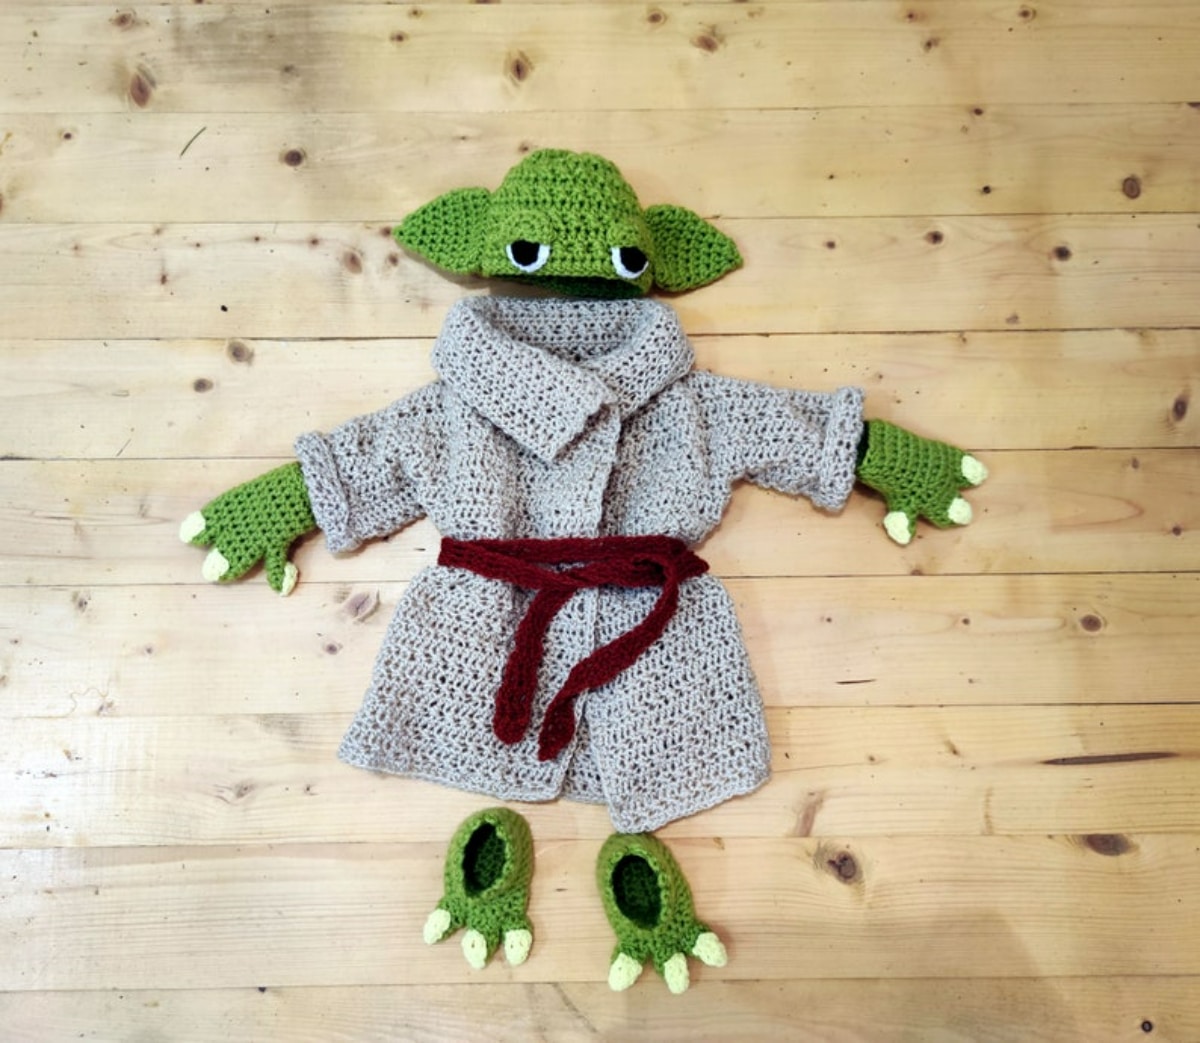 Green crochet baby Yoda beanie hat with matching green gloves, shoes and a gray robe with a brown belt around the middle.